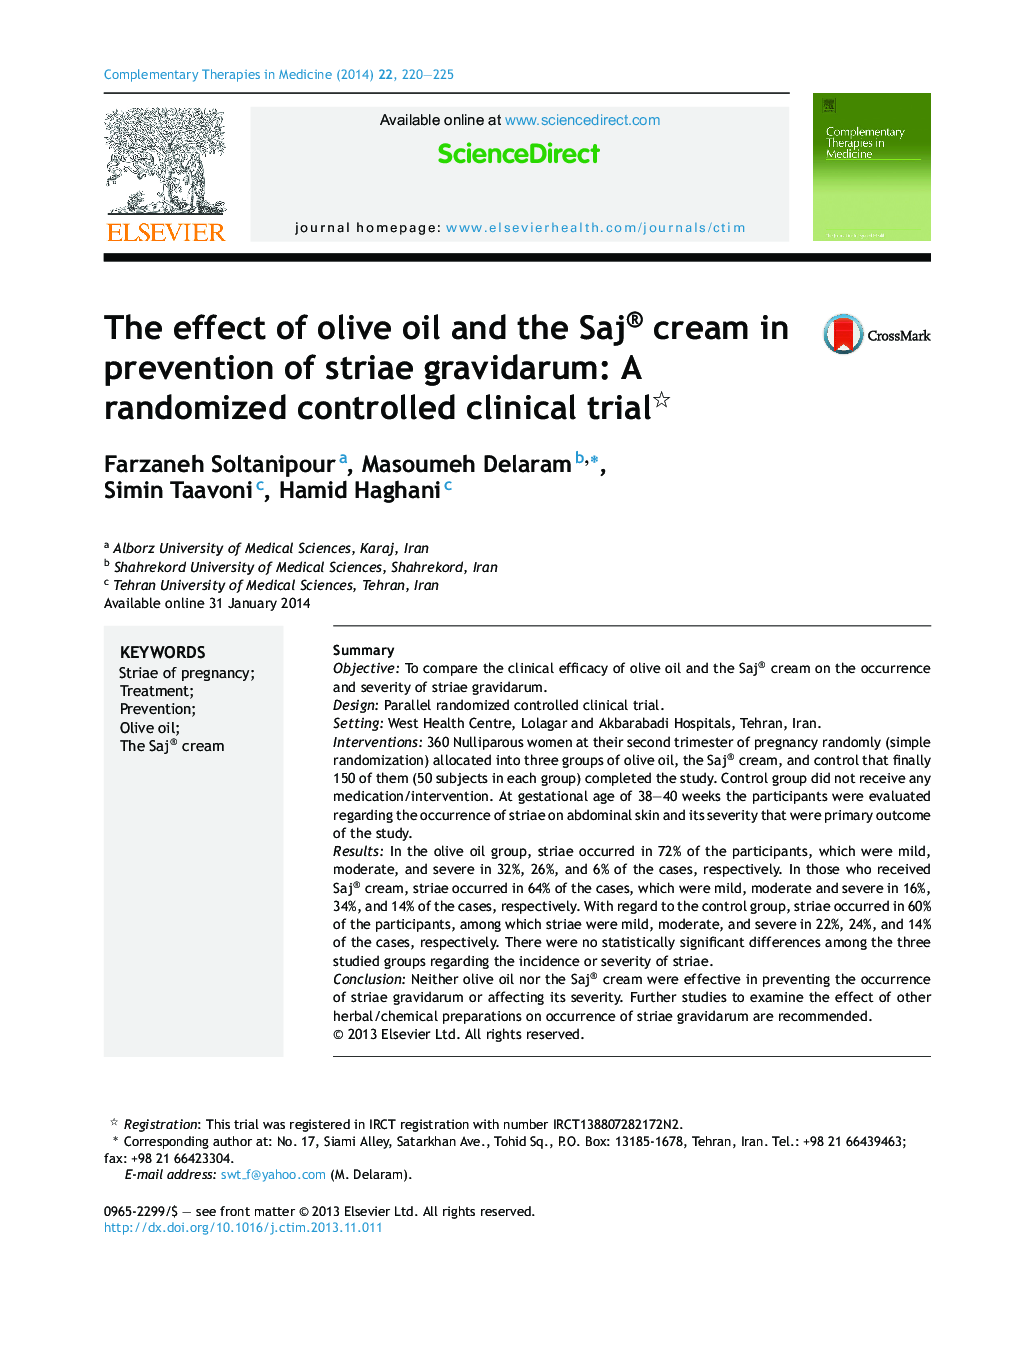 The effect of olive oil and the Saj® cream in prevention of striae gravidarum: A randomized controlled clinical trial